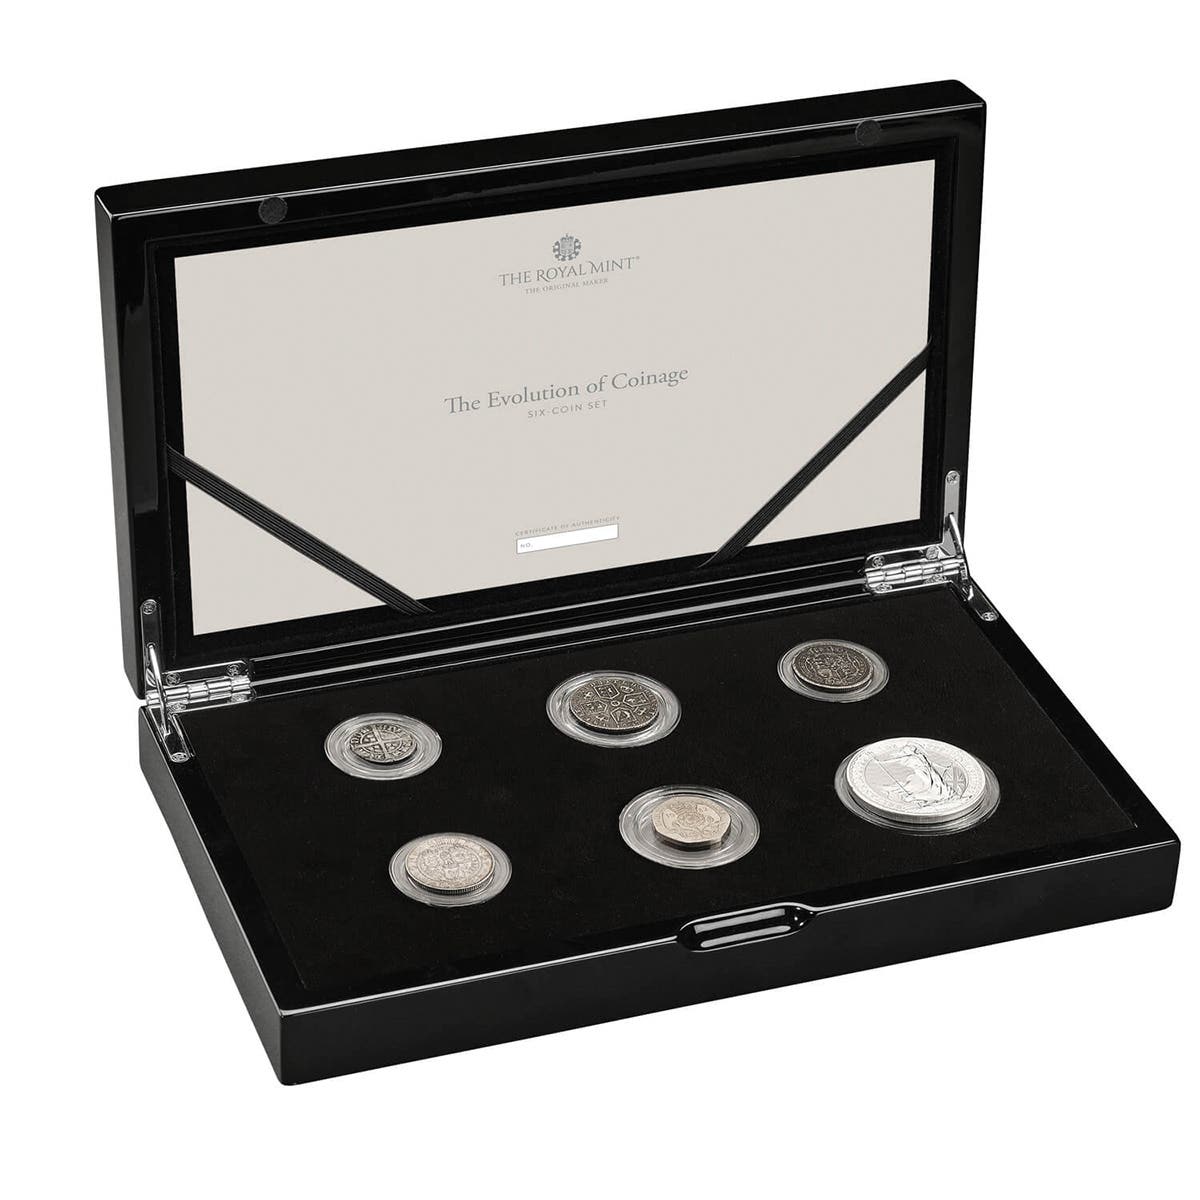 The Evolution of Coinage Six-Coin Set